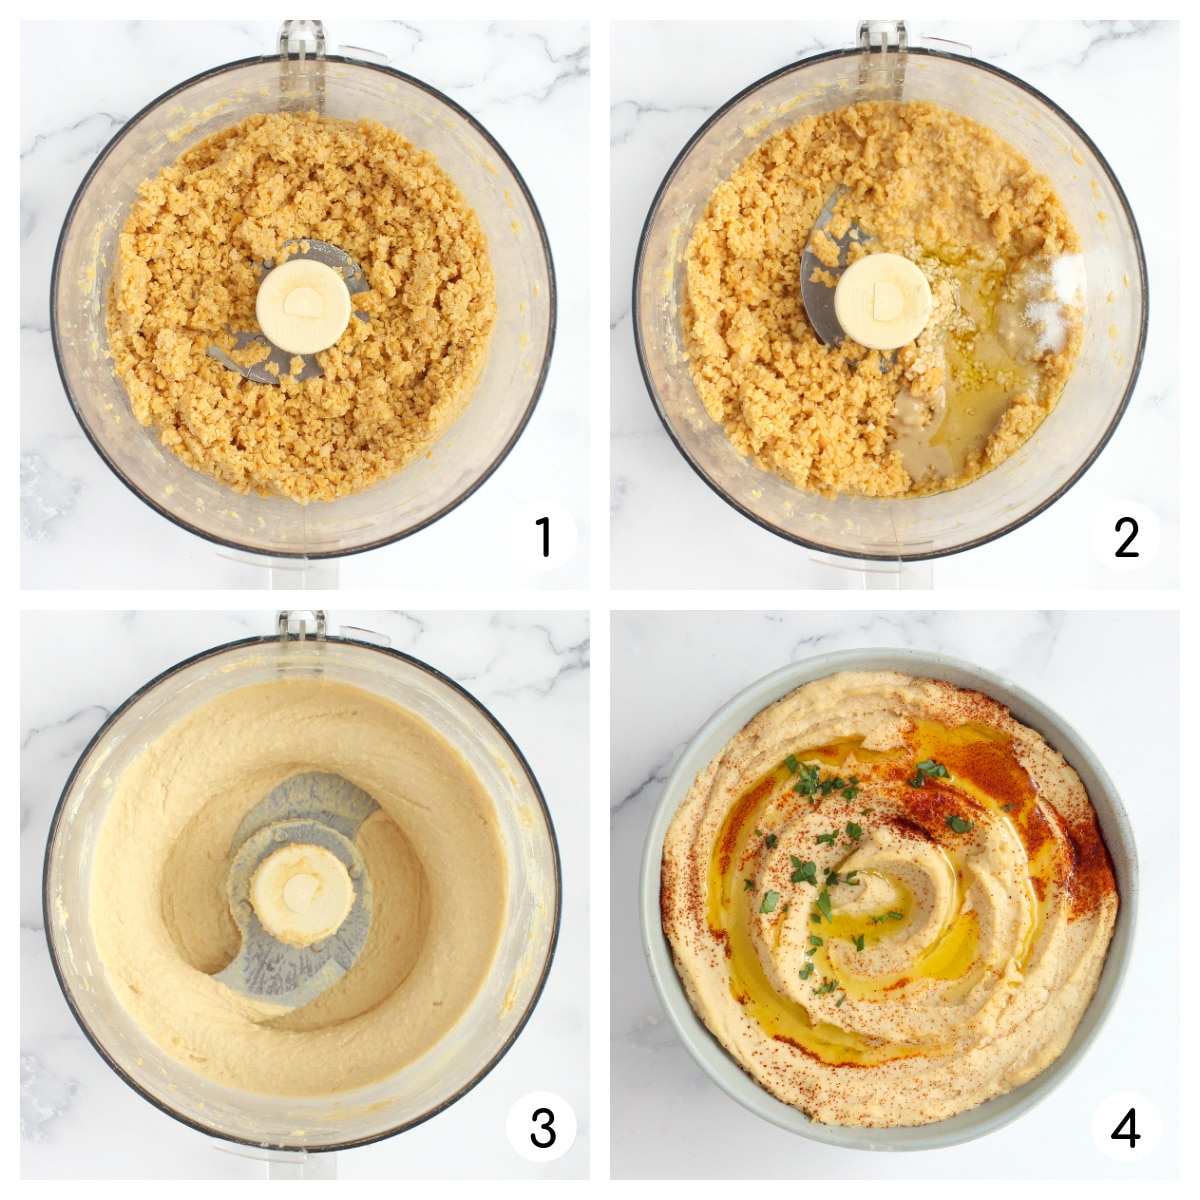 Process shots for how to make homemade hummus in a food processor.